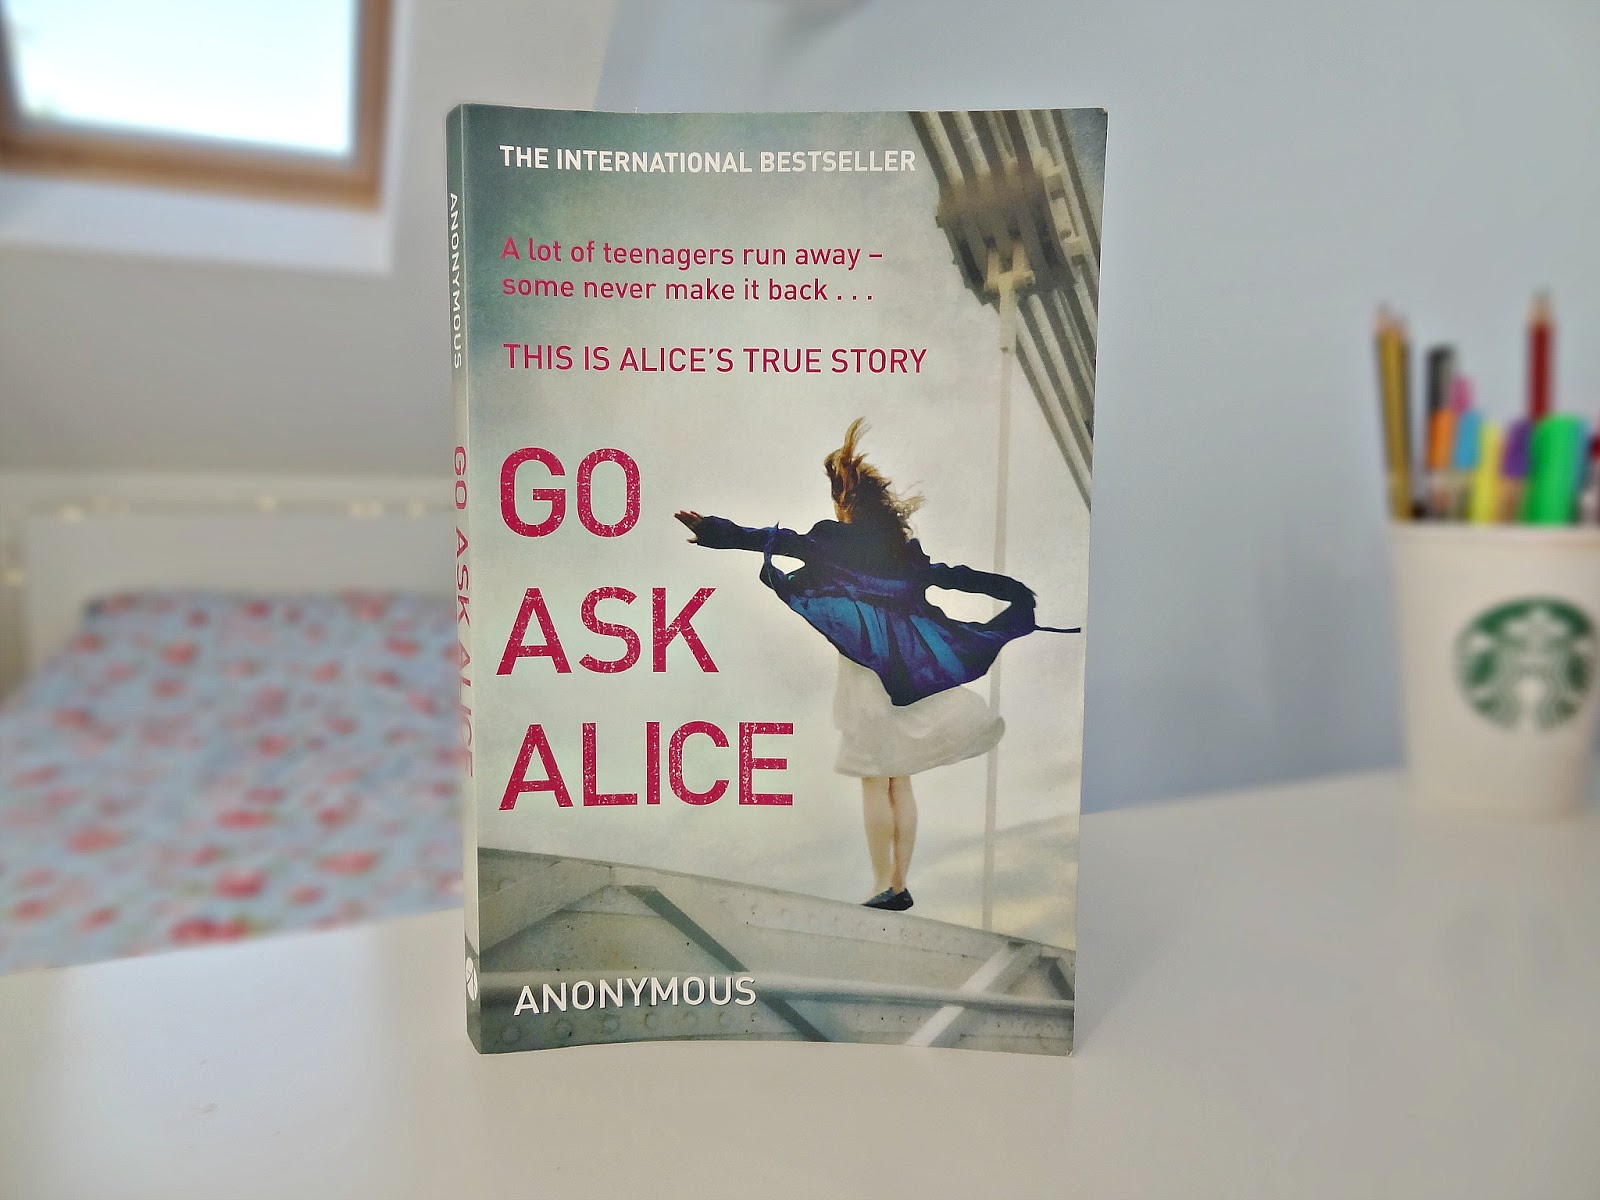 Go ask alice book review essays